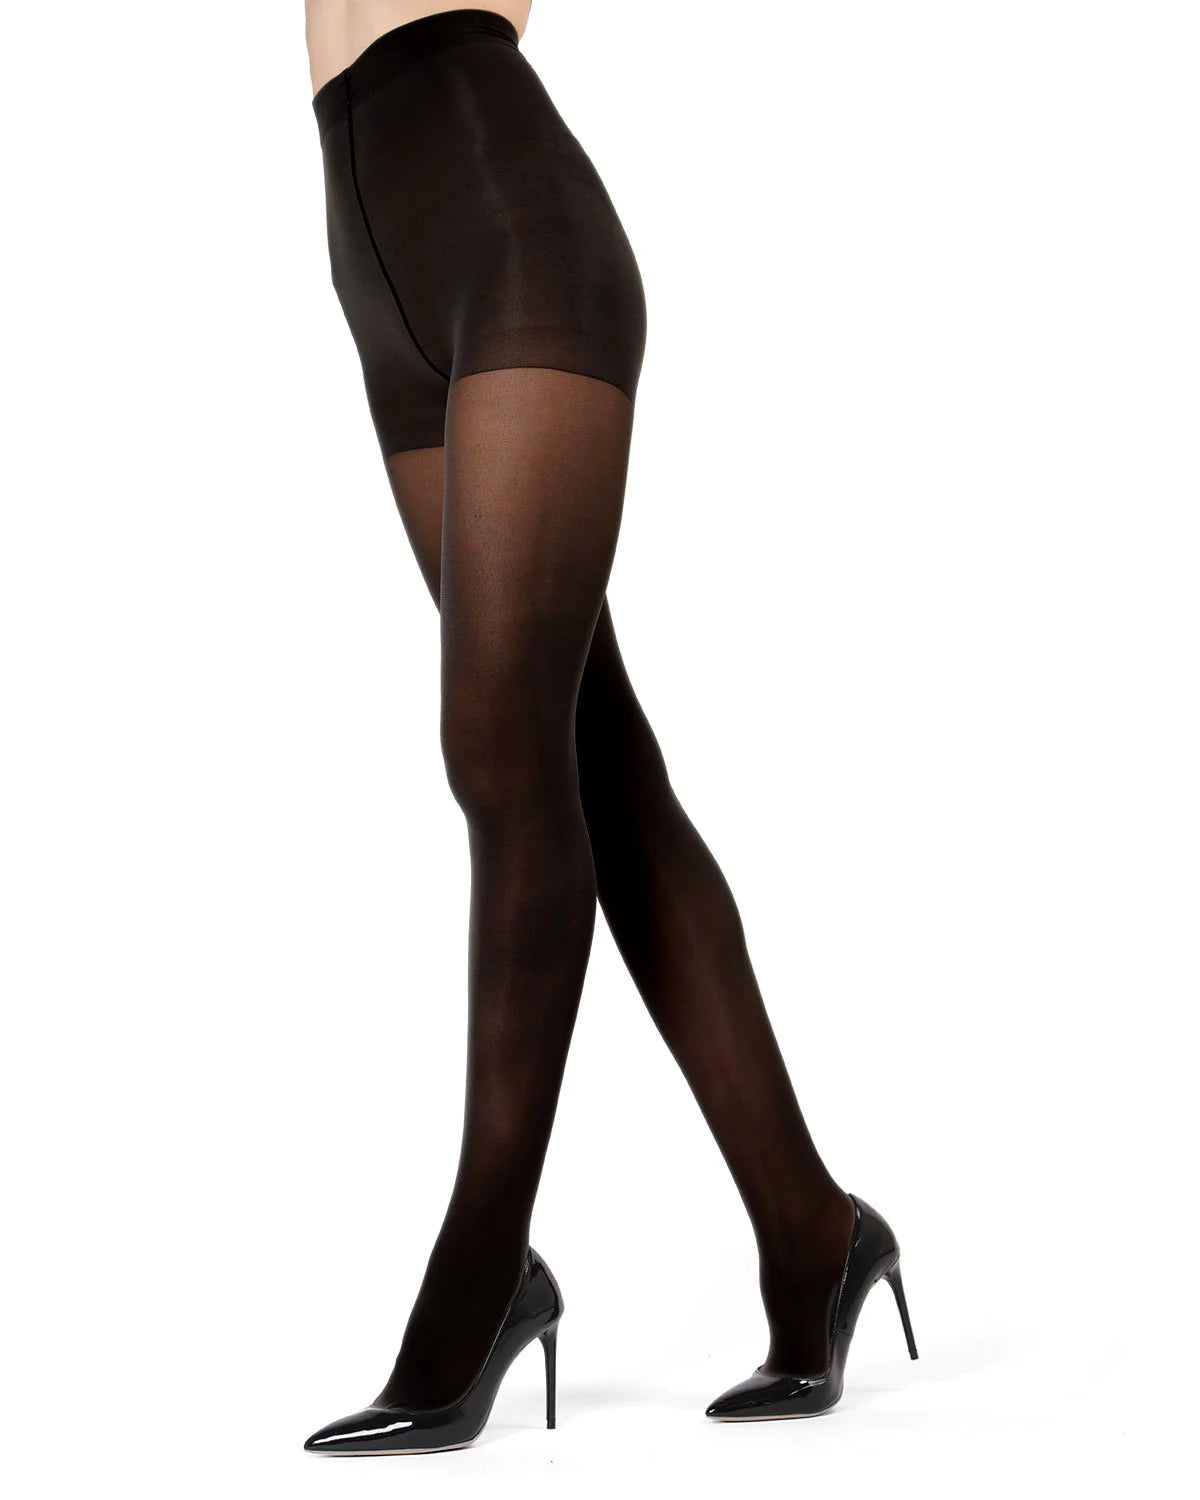 Perfectly Opaque Control Top Tights - Black